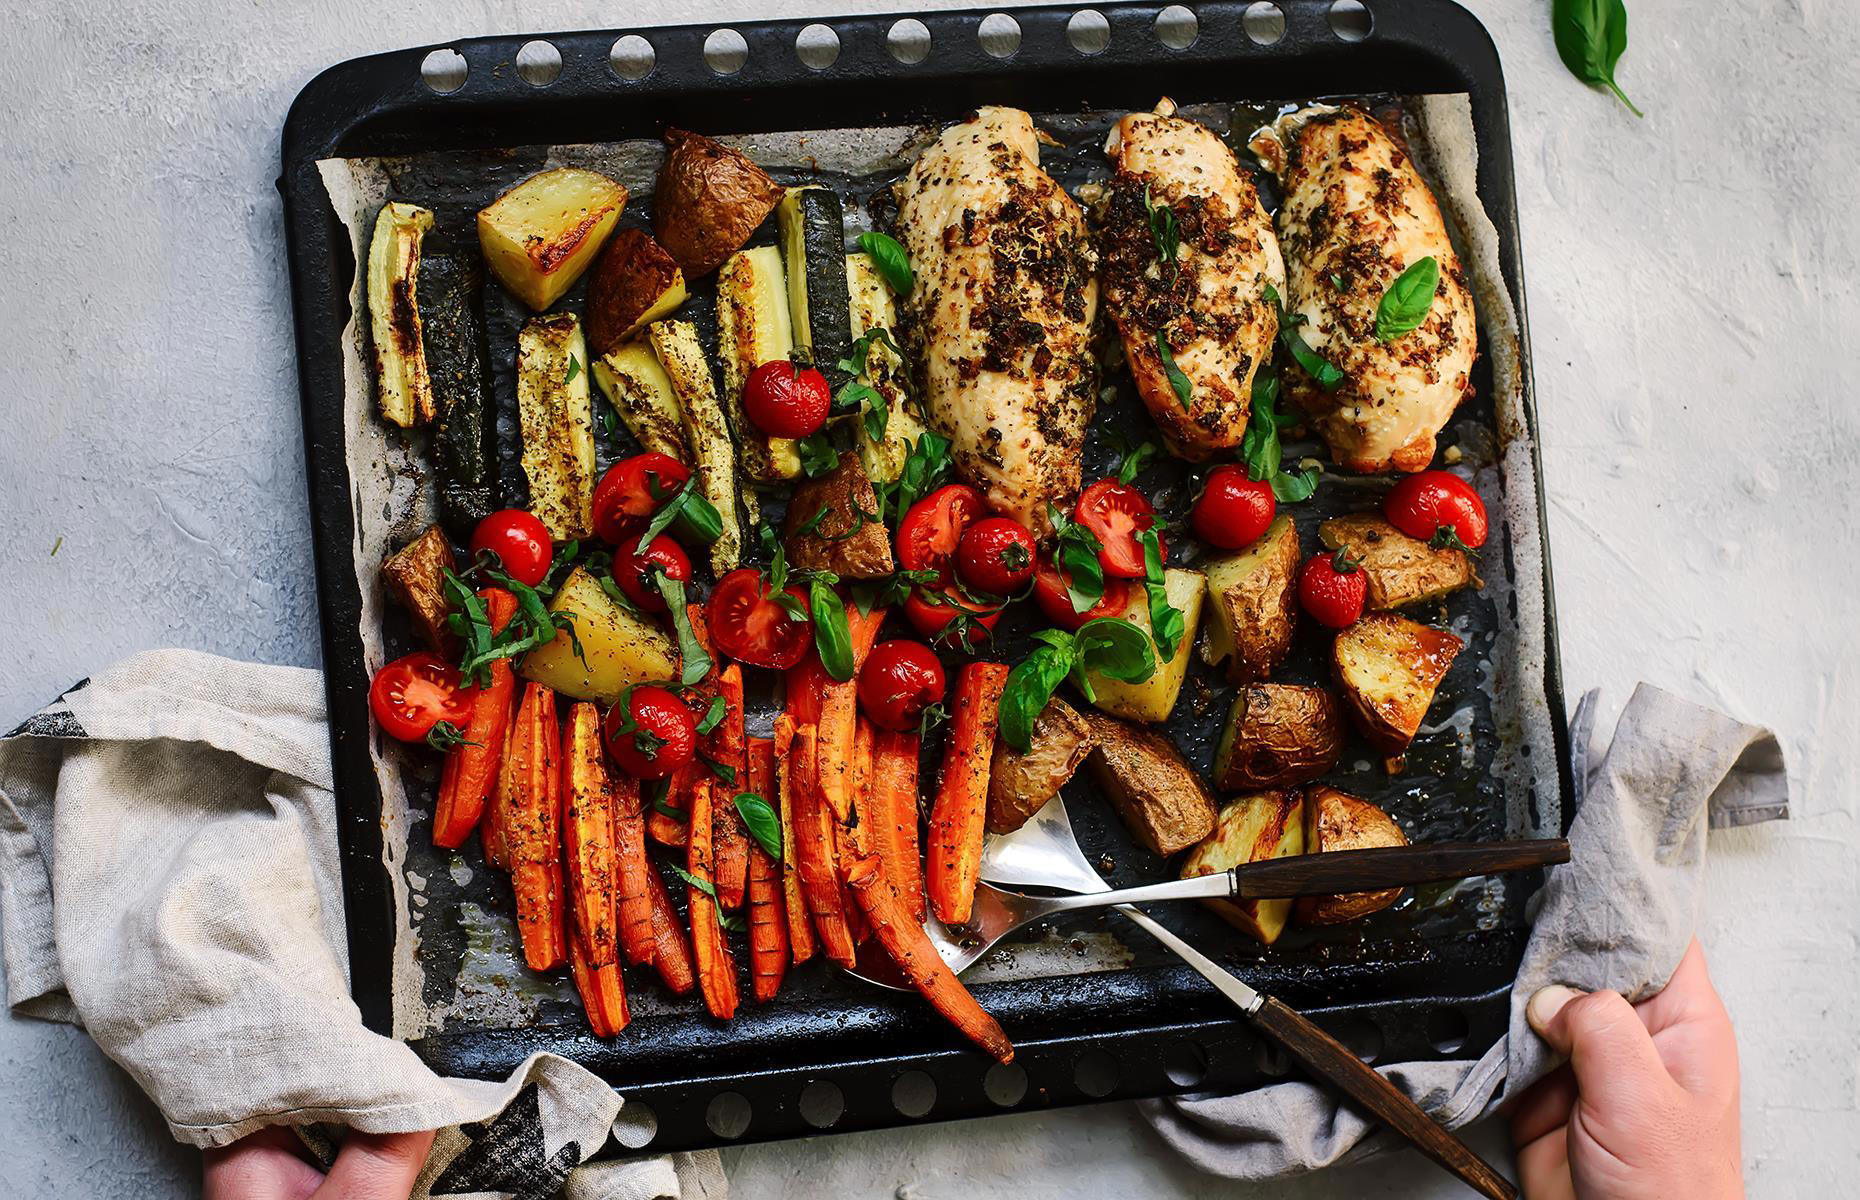 You won't believe how quick and easy these one-tray recipes are